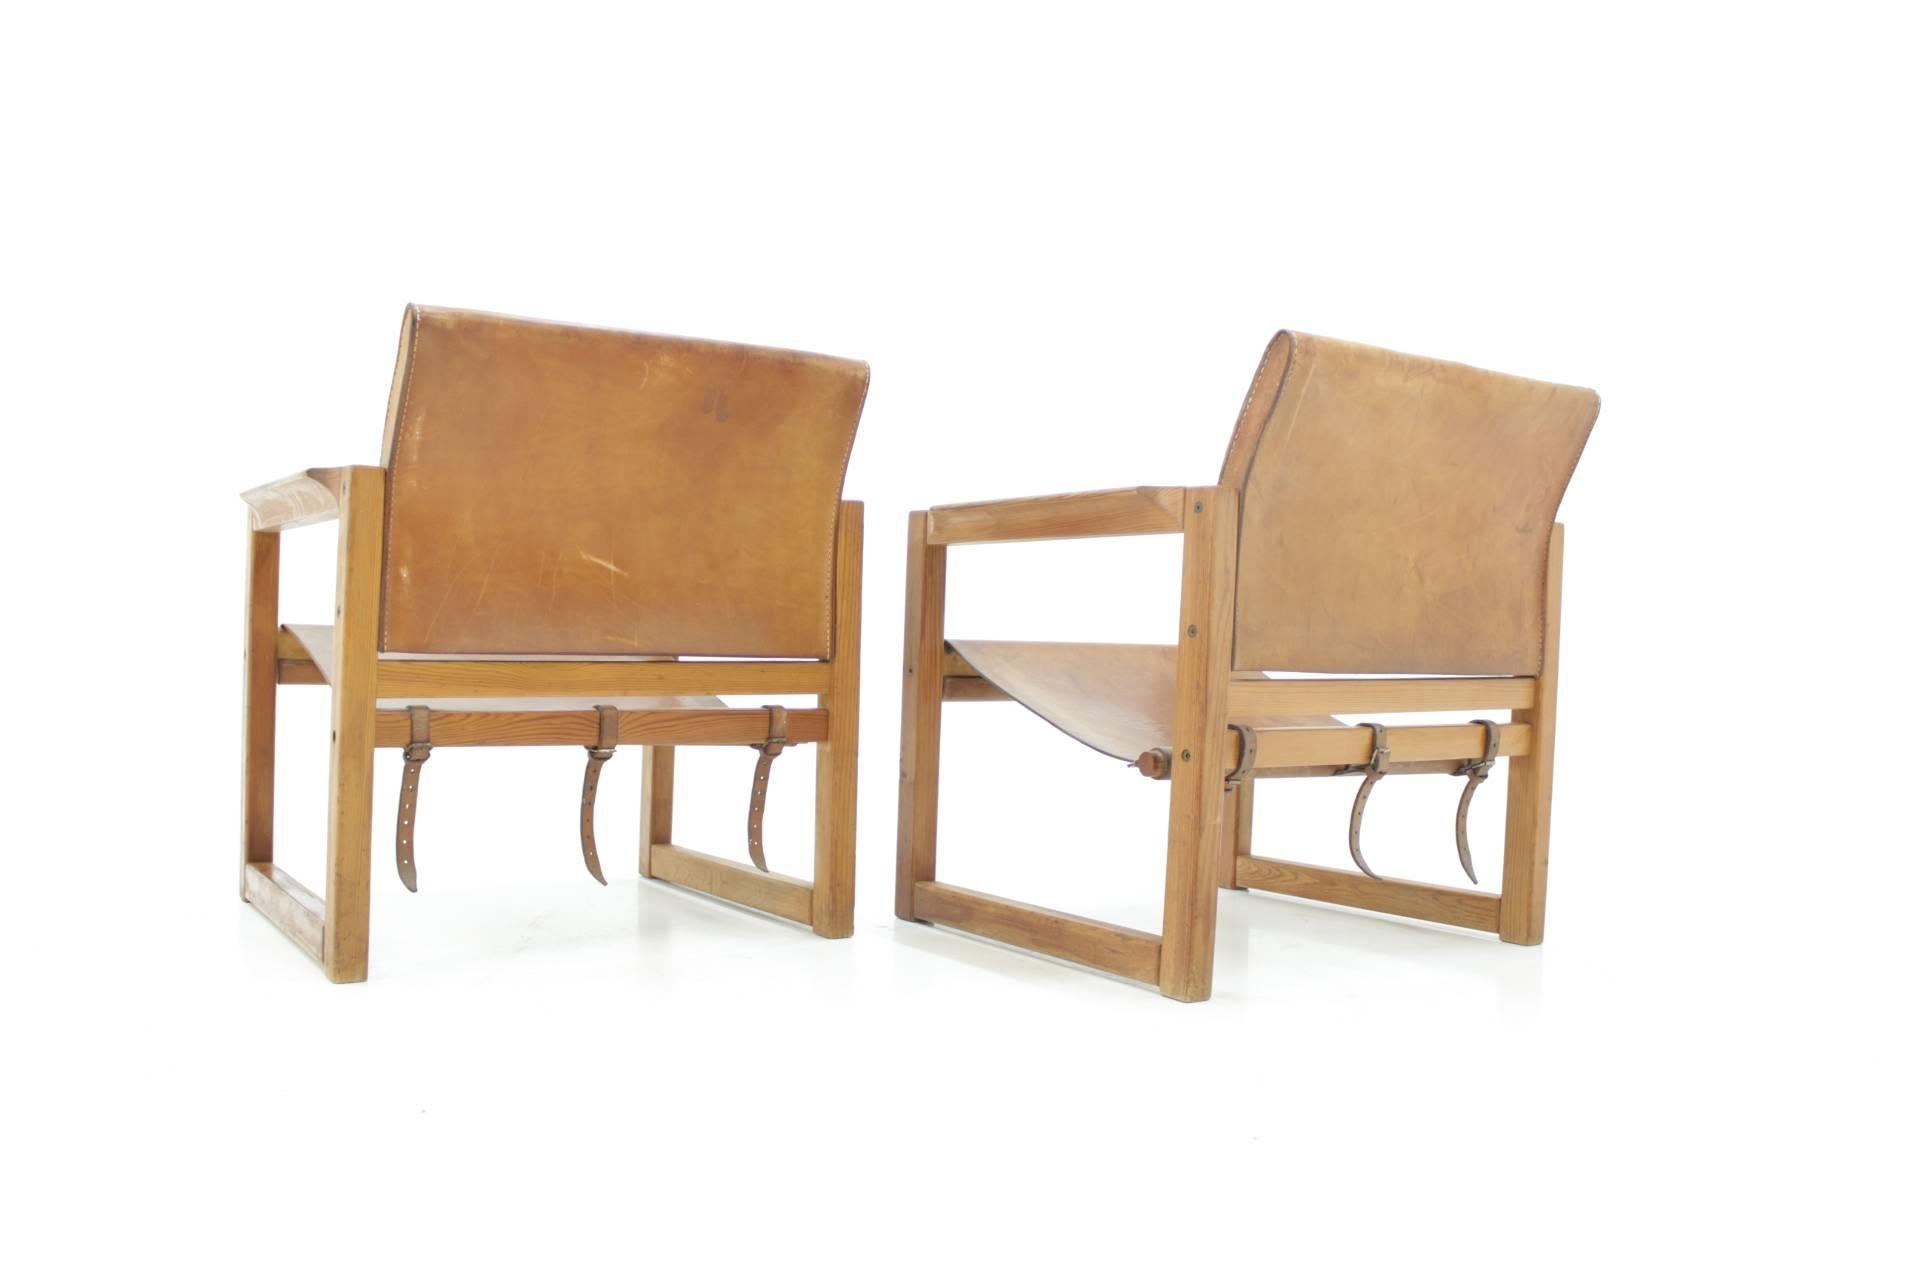 Swedish Pair of Midcentury Leather Safari Chairs Designed by Karin Mobring, 1970s